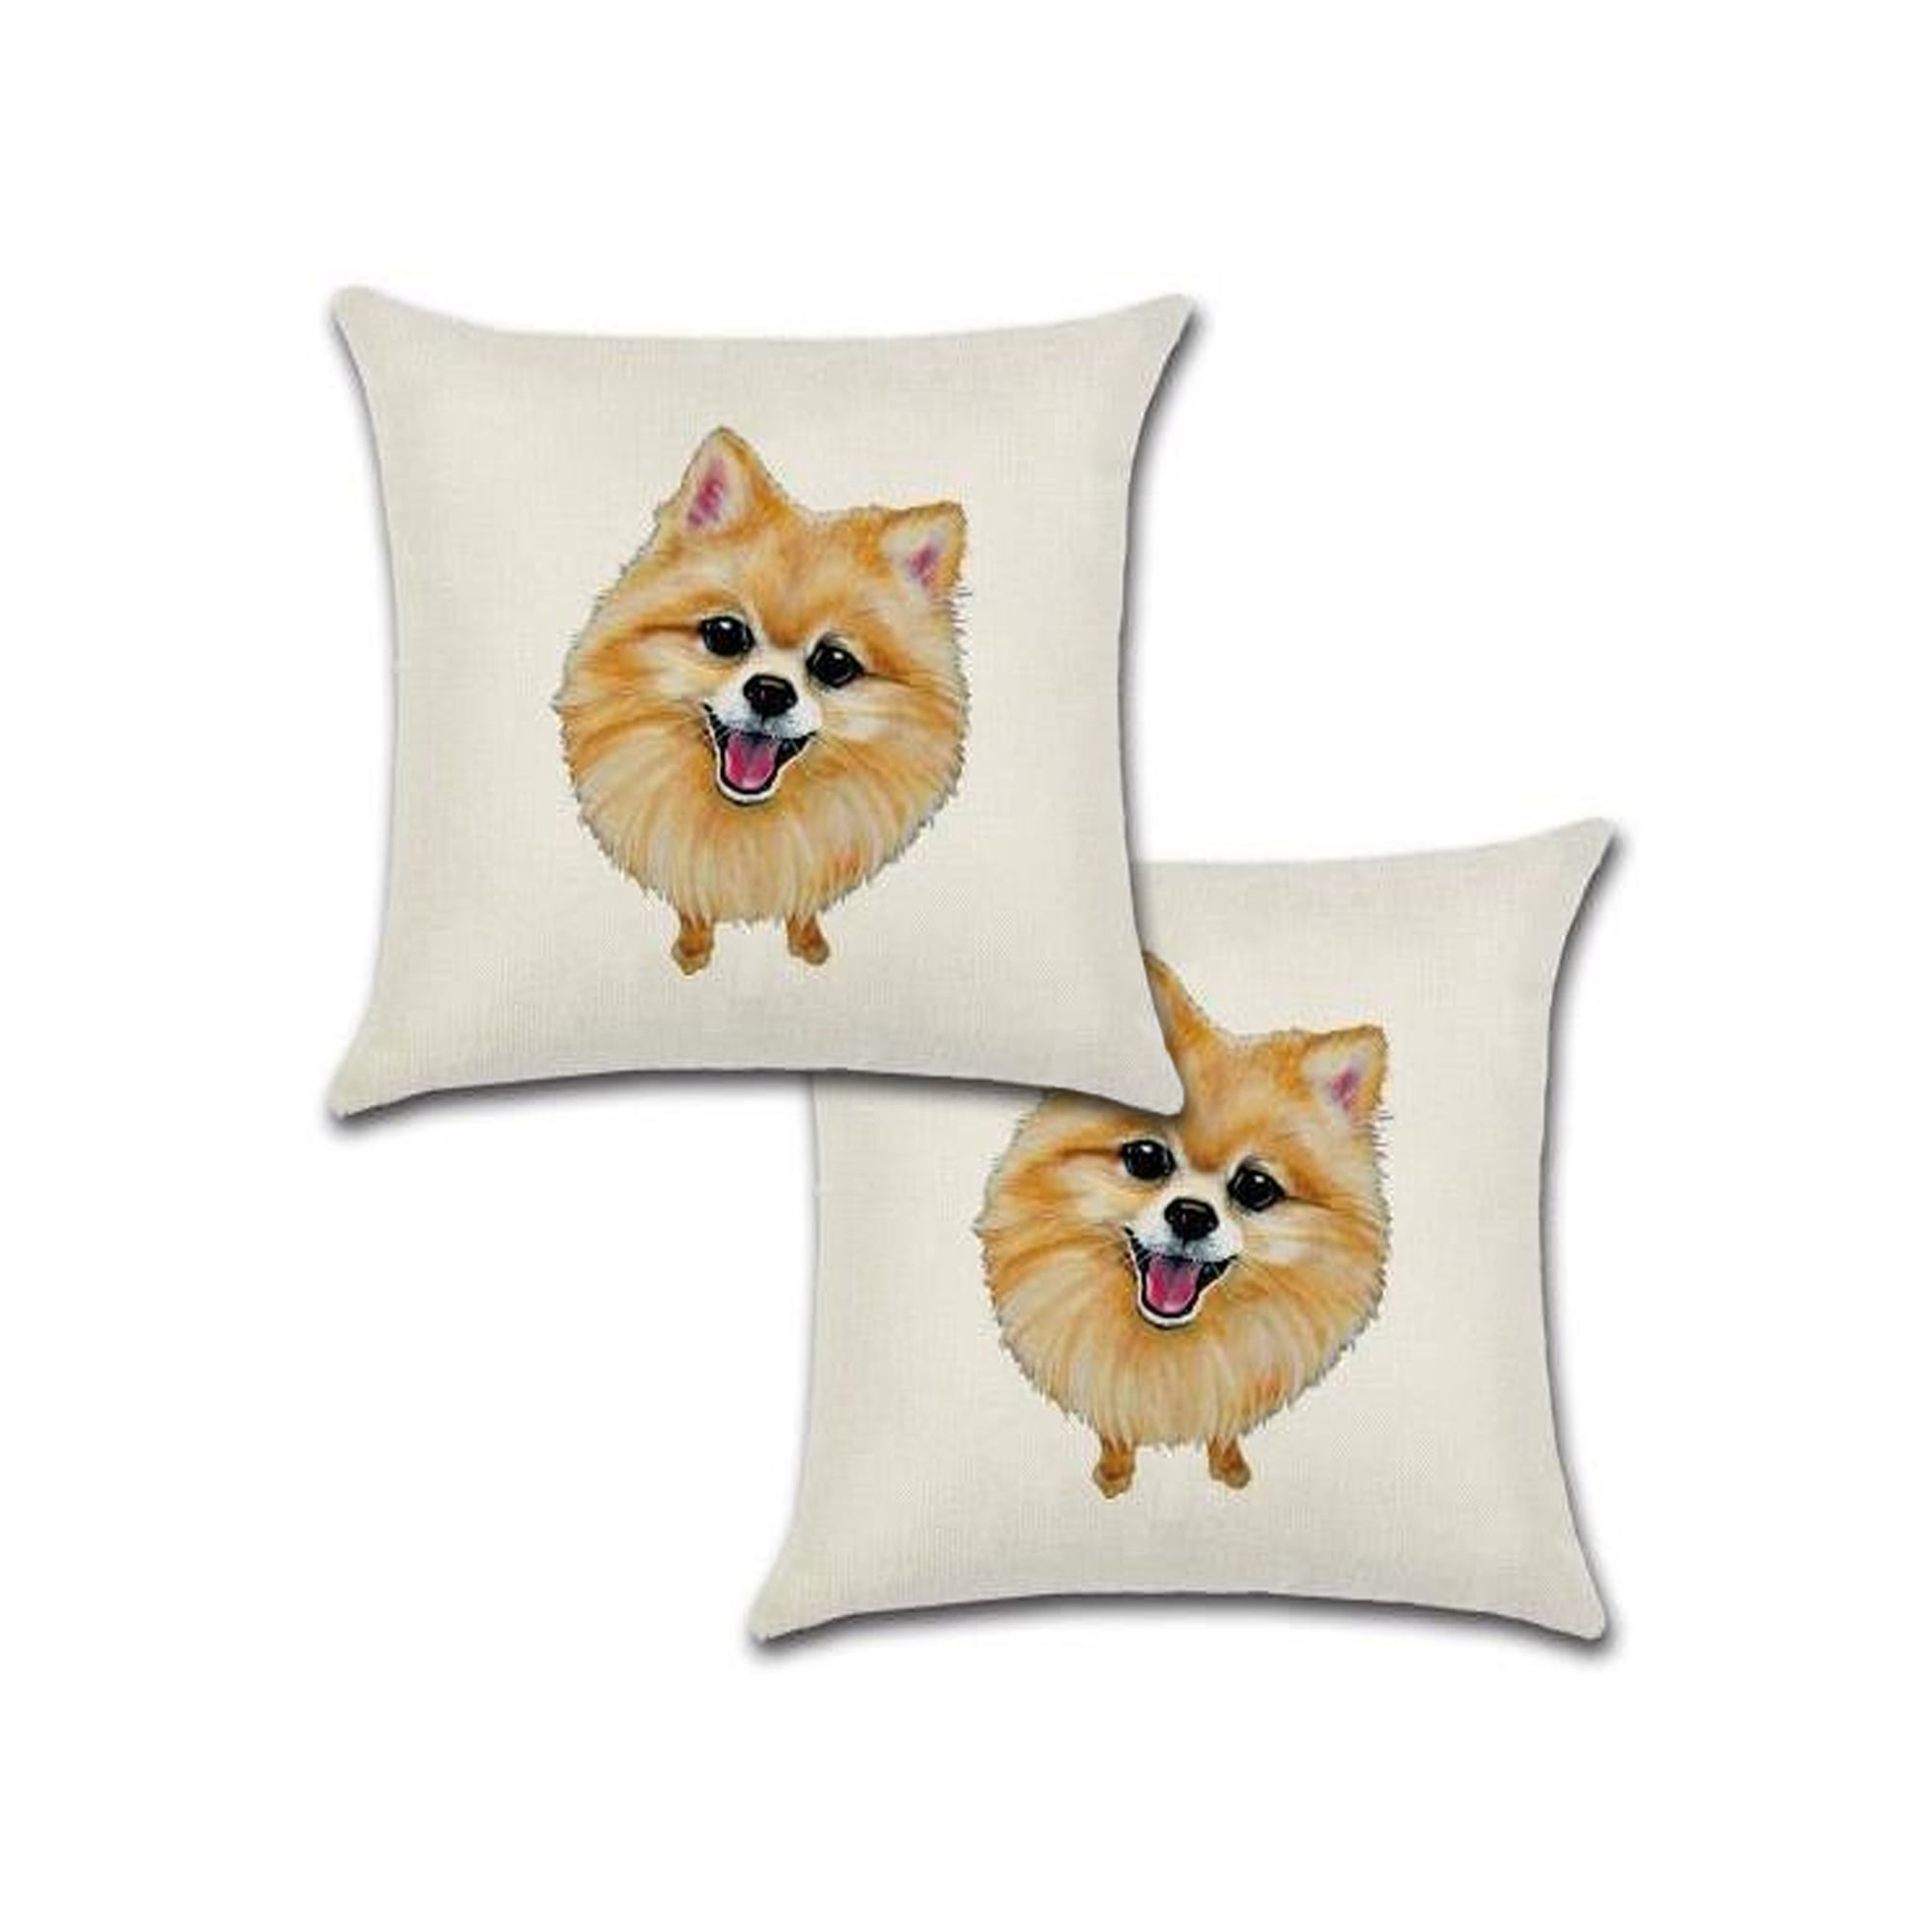 Animal Dog JOEJISN Throw Pillow Covers Cotton Linen Couch Pillow Cover Sofa Home Decor 18x18 Inch Set of 2